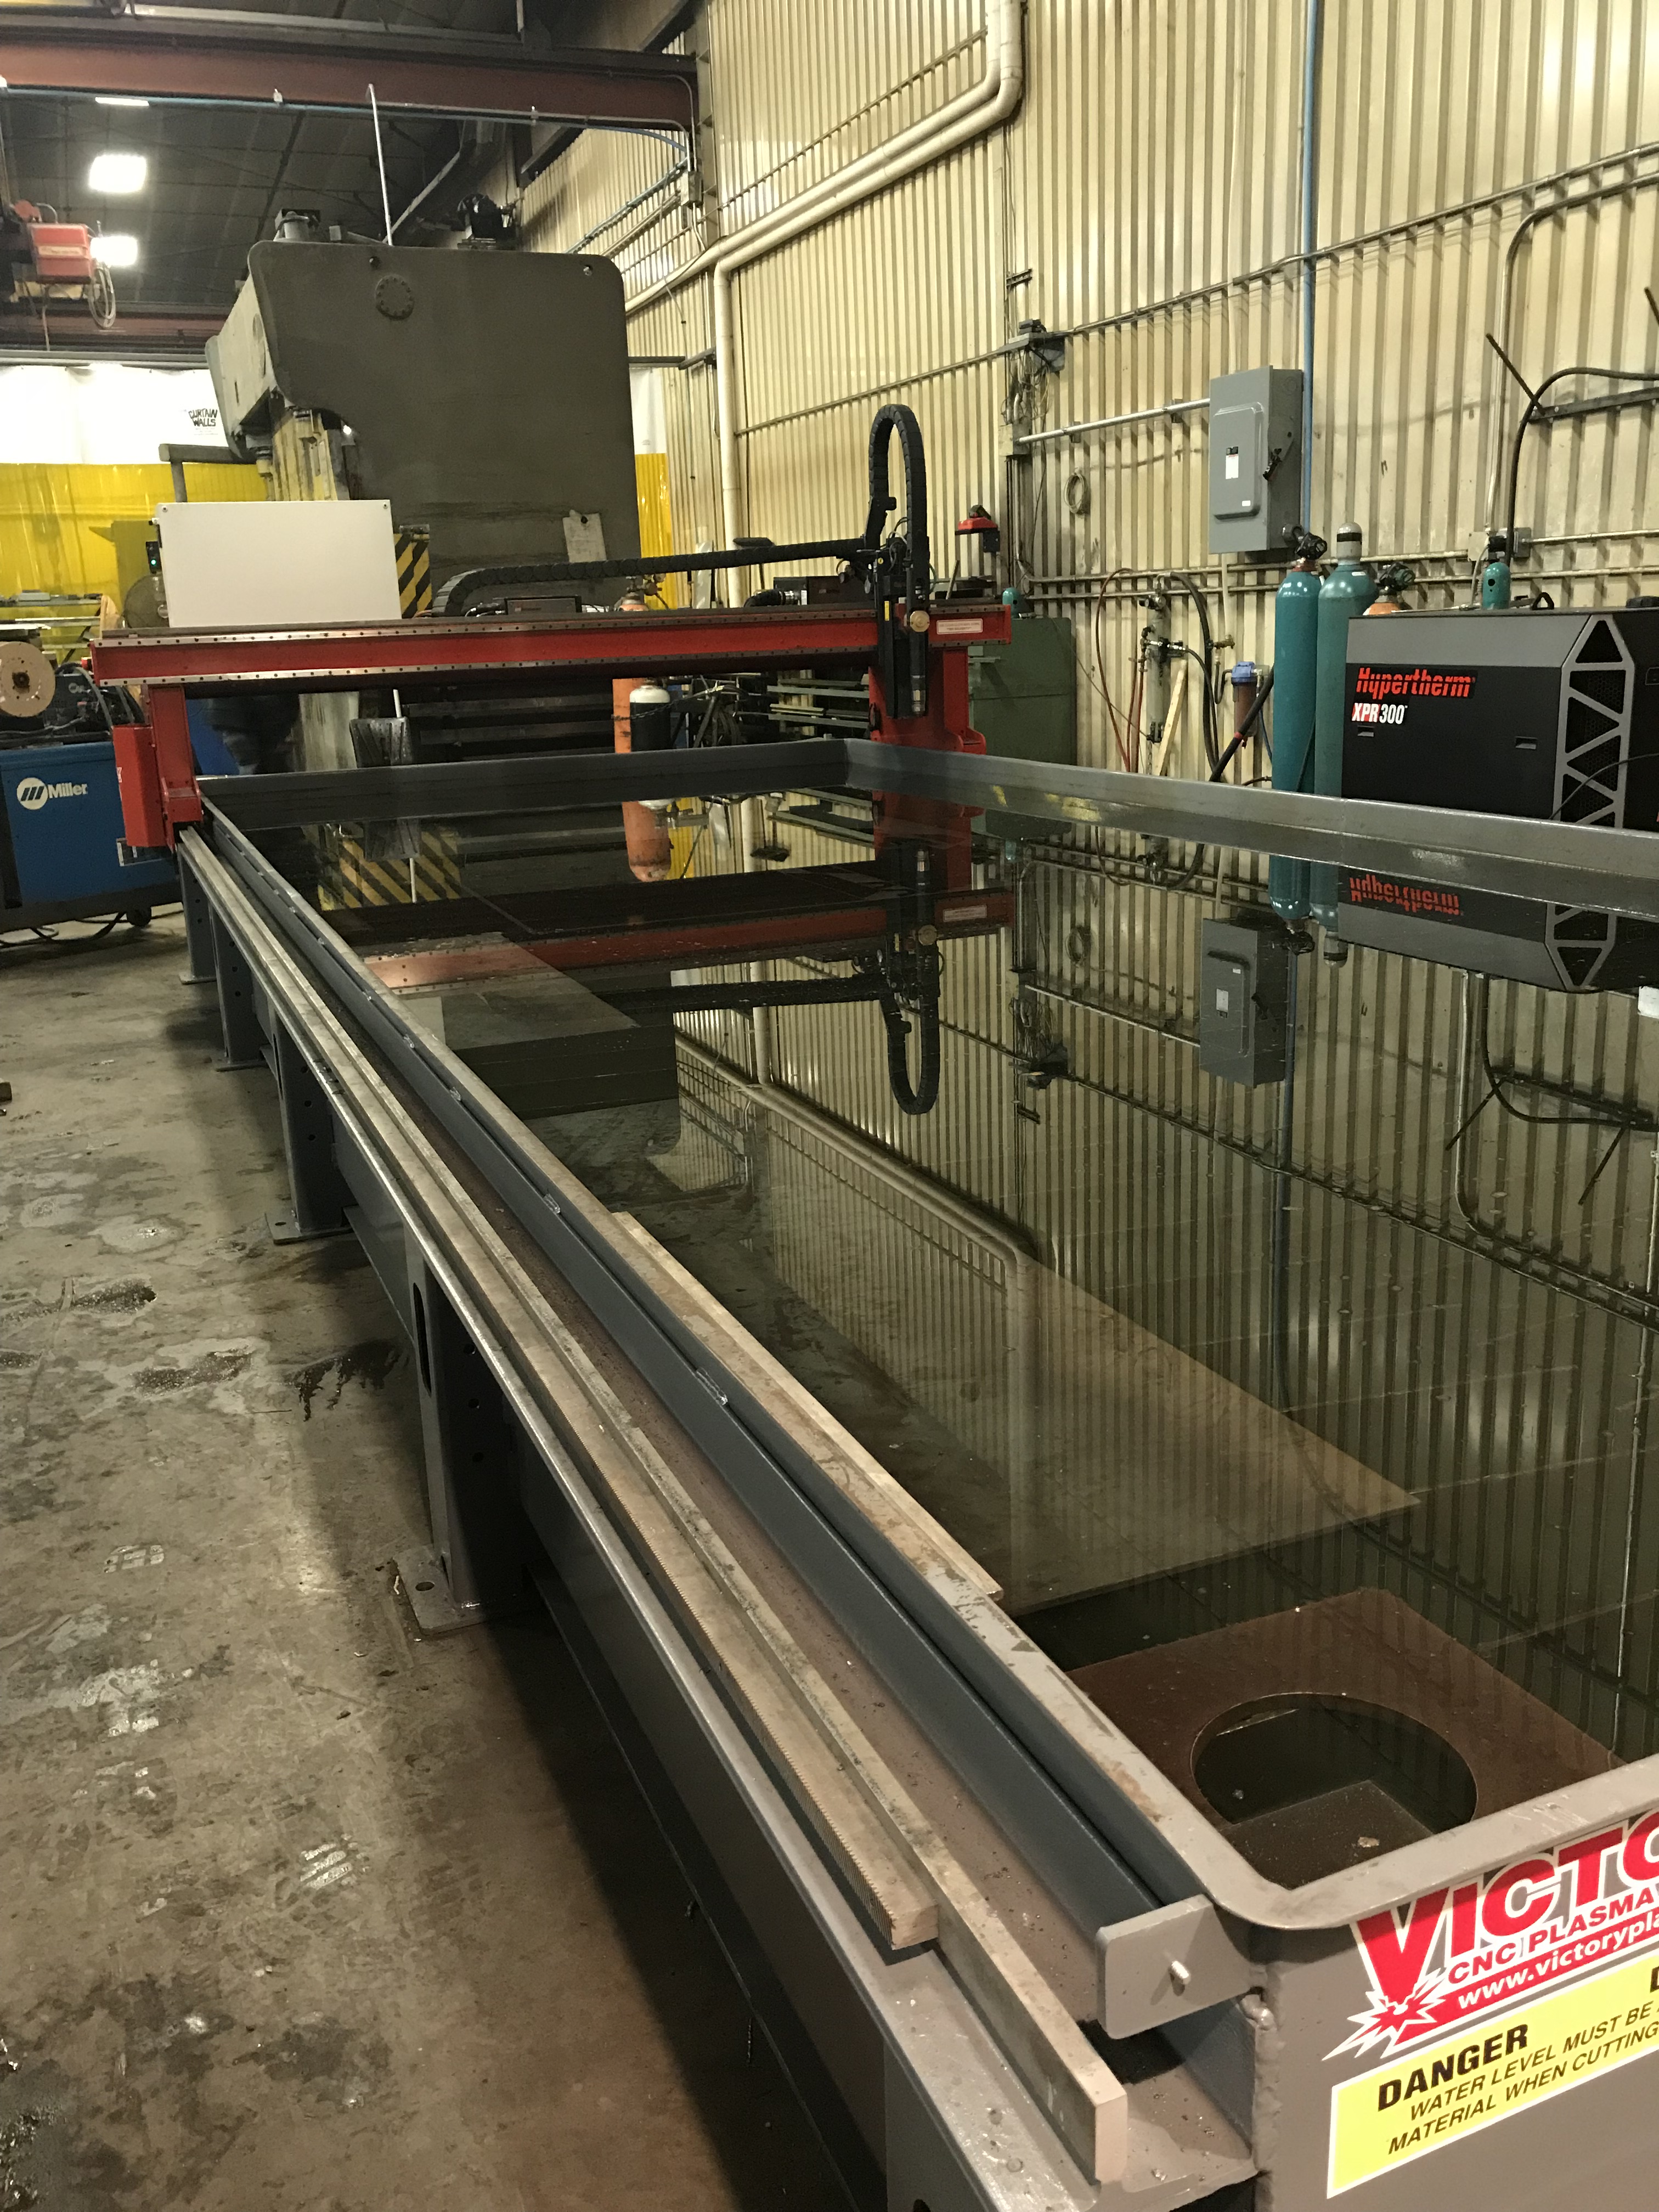 Victory CNC Plasma Systems 8'x20' Hypertherm EDGE Connect system with high-def XPR300